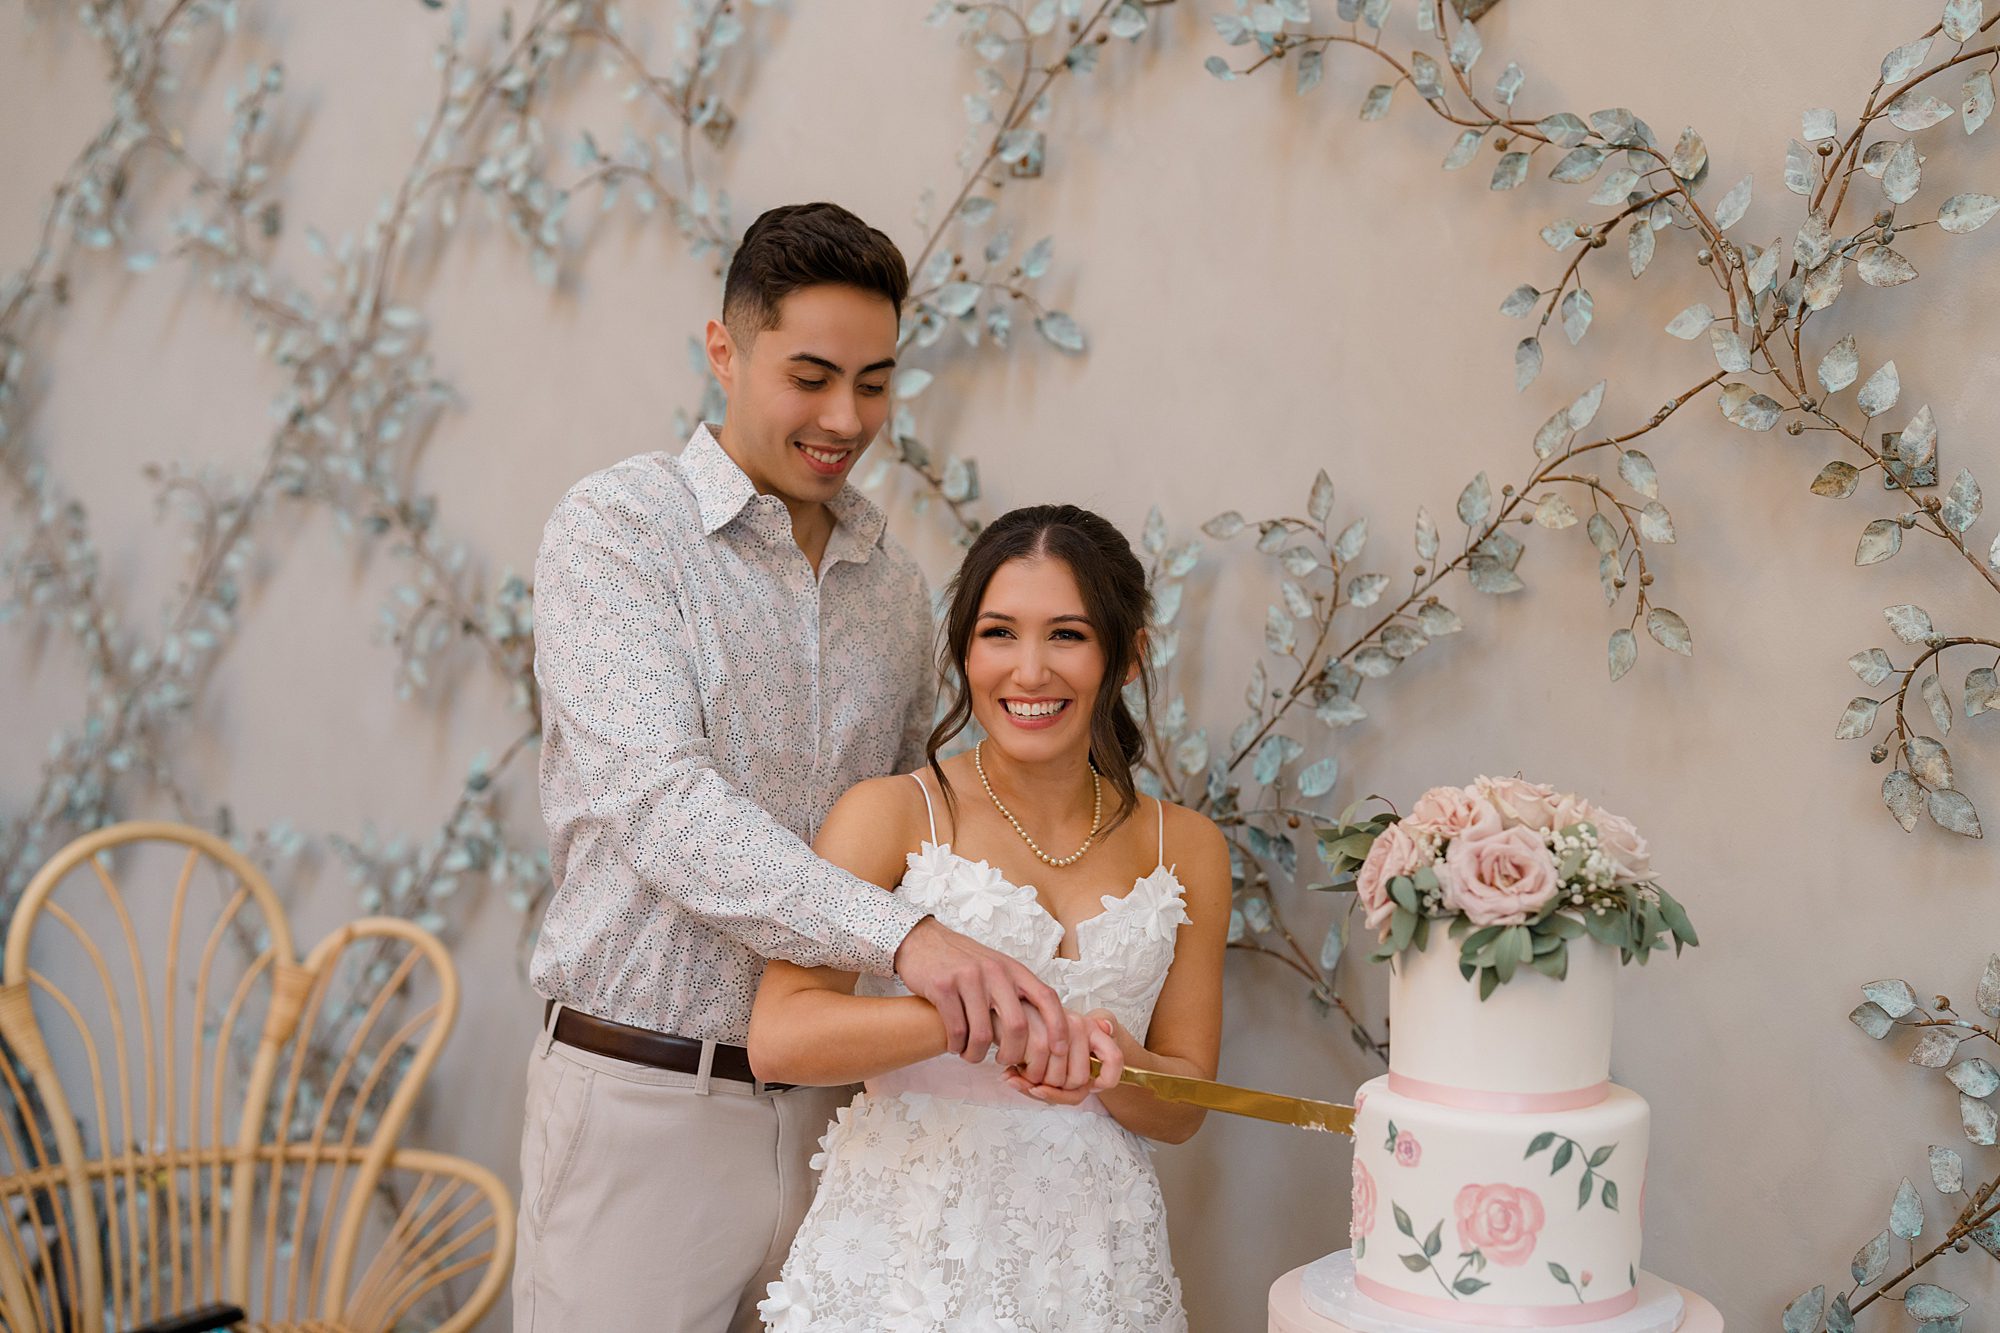 soon-to-be-newlyweds cut their cake at bridal shower